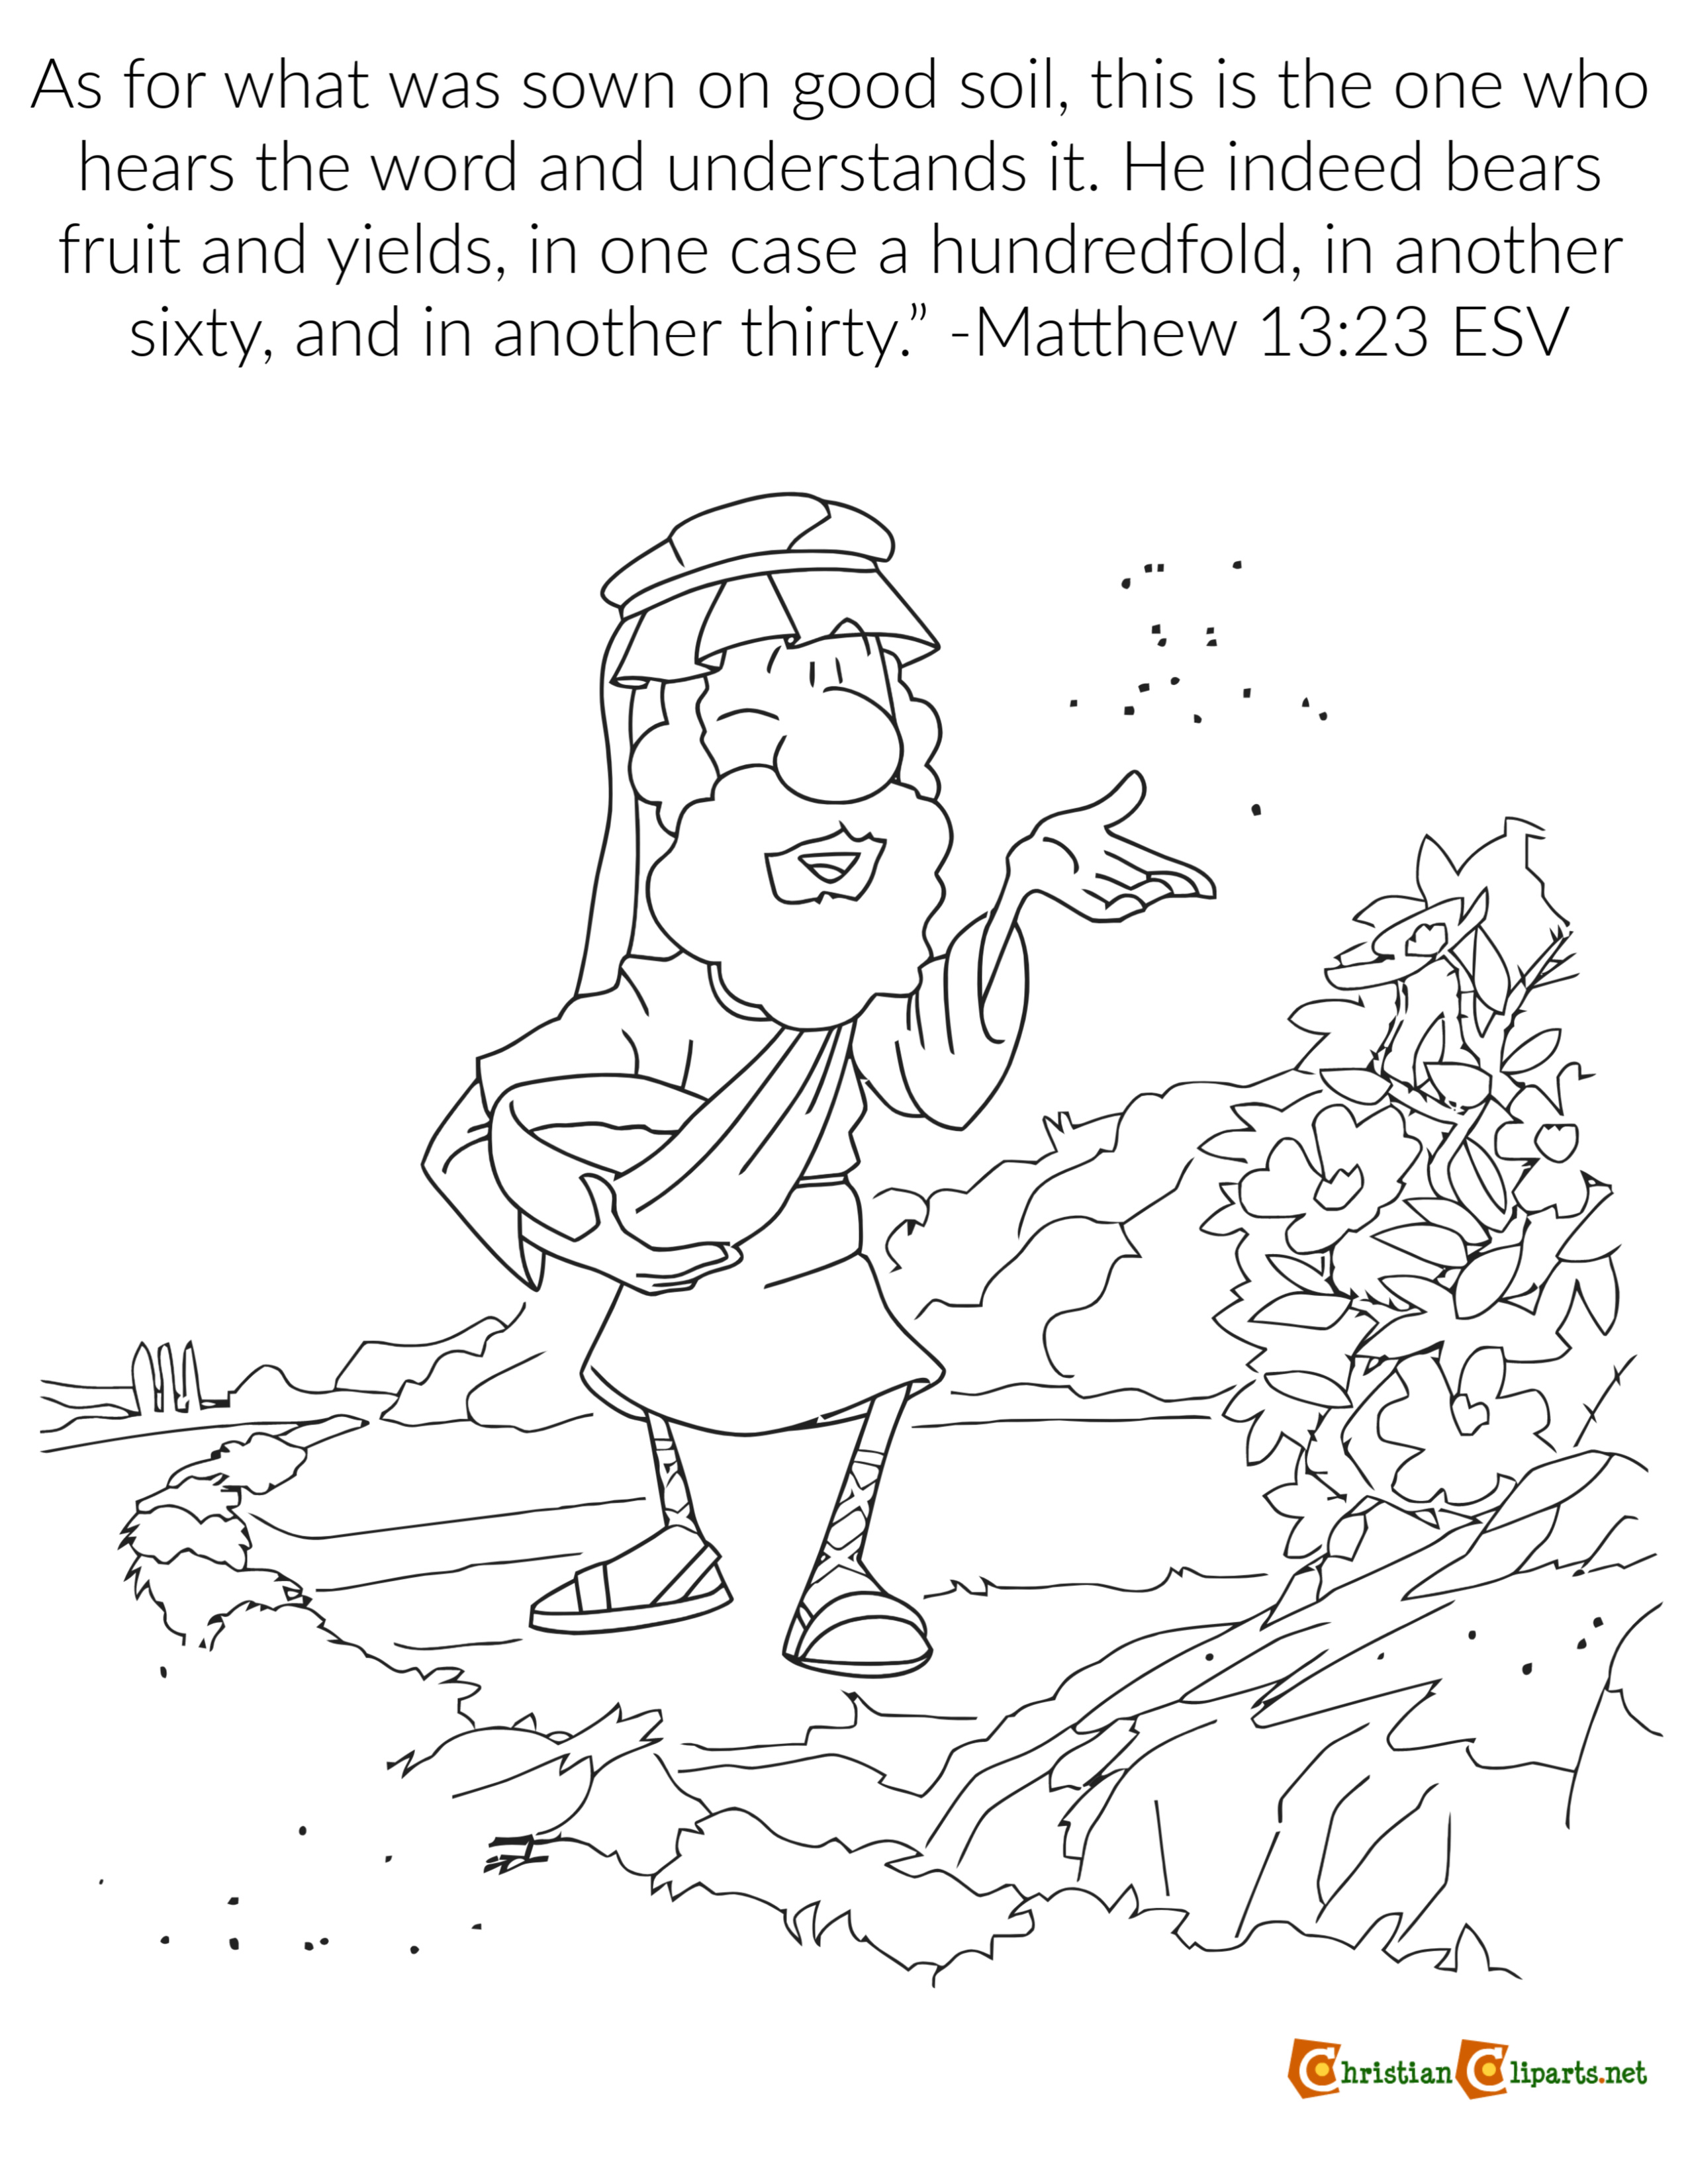 parable-of-the-sower-coloring-page-bible-crafts-sunday-school-images